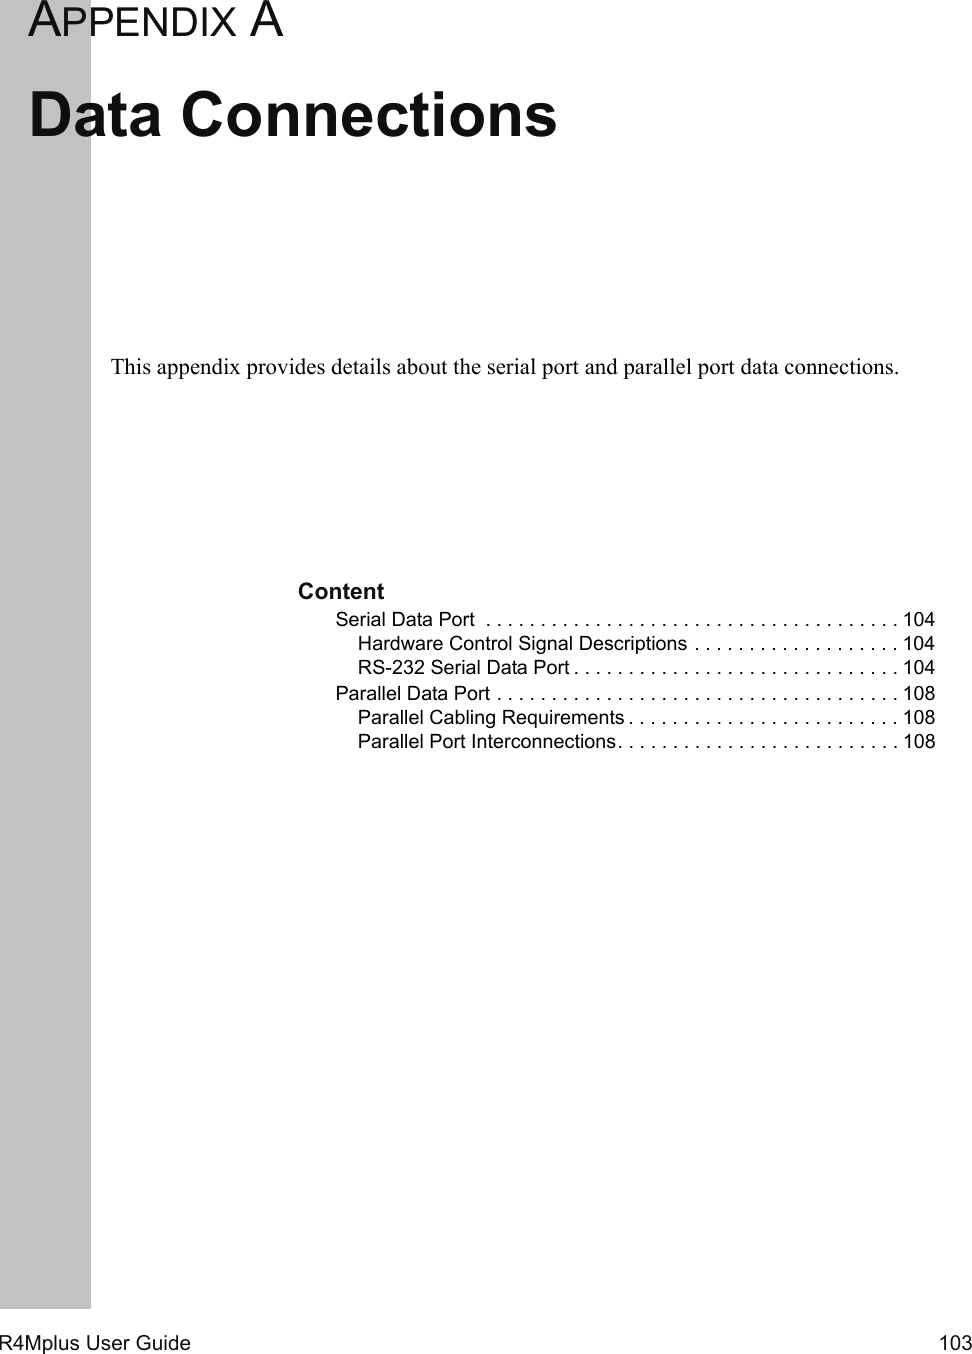 R4Mplus User Guide  103APPENDIX AData ConnectionsThis appendix provides details about the serial port and parallel port data connections.ContentSerial Data Port  . . . . . . . . . . . . . . . . . . . . . . . . . . . . . . . . . . . . . . 104Hardware Control Signal Descriptions . . . . . . . . . . . . . . . . . . . 104RS-232 Serial Data Port . . . . . . . . . . . . . . . . . . . . . . . . . . . . . . 104Parallel Data Port . . . . . . . . . . . . . . . . . . . . . . . . . . . . . . . . . . . . . 108Parallel Cabling Requirements . . . . . . . . . . . . . . . . . . . . . . . . . 108Parallel Port Interconnections. . . . . . . . . . . . . . . . . . . . . . . . . . 108